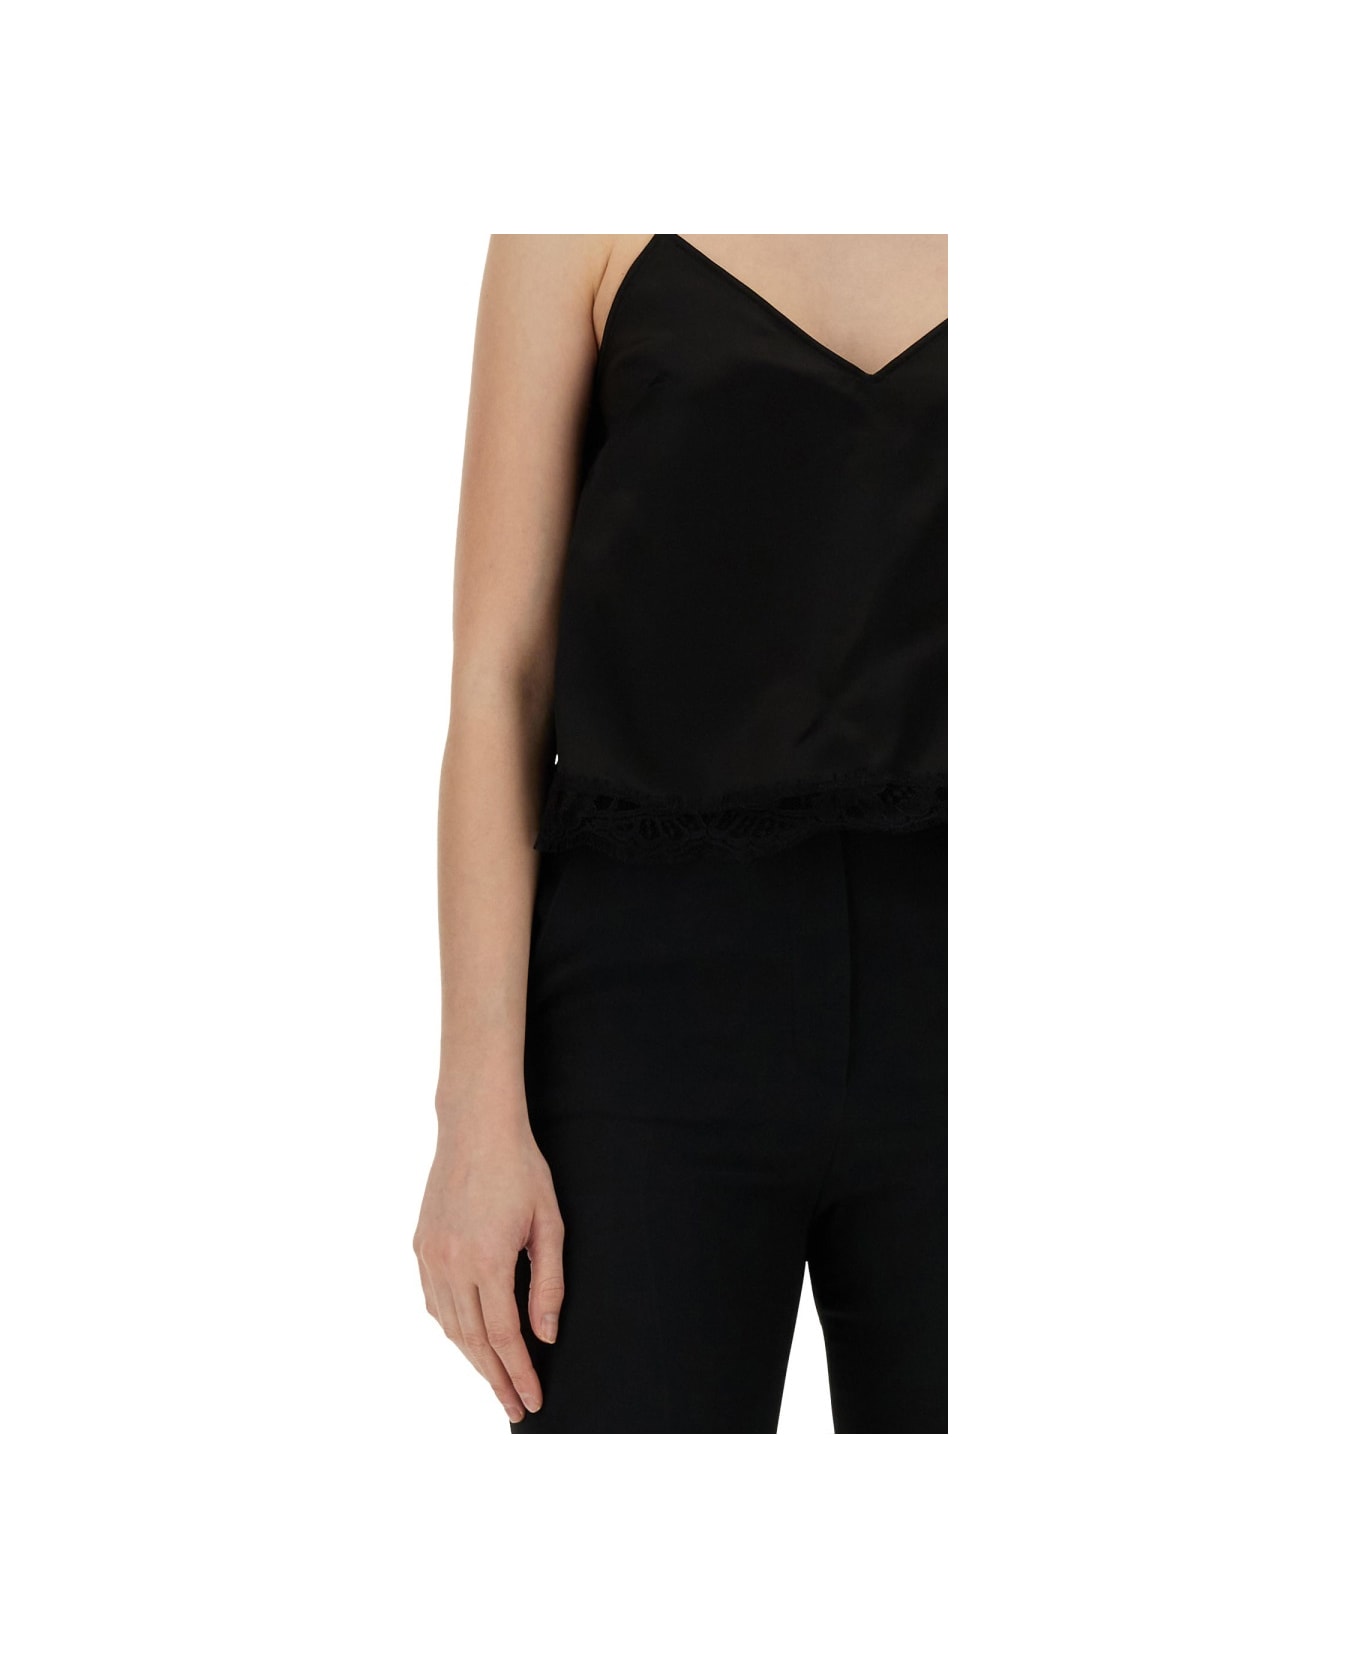 Alexander McQueen Top With Thin Straps - BLACK ジャンプスーツ